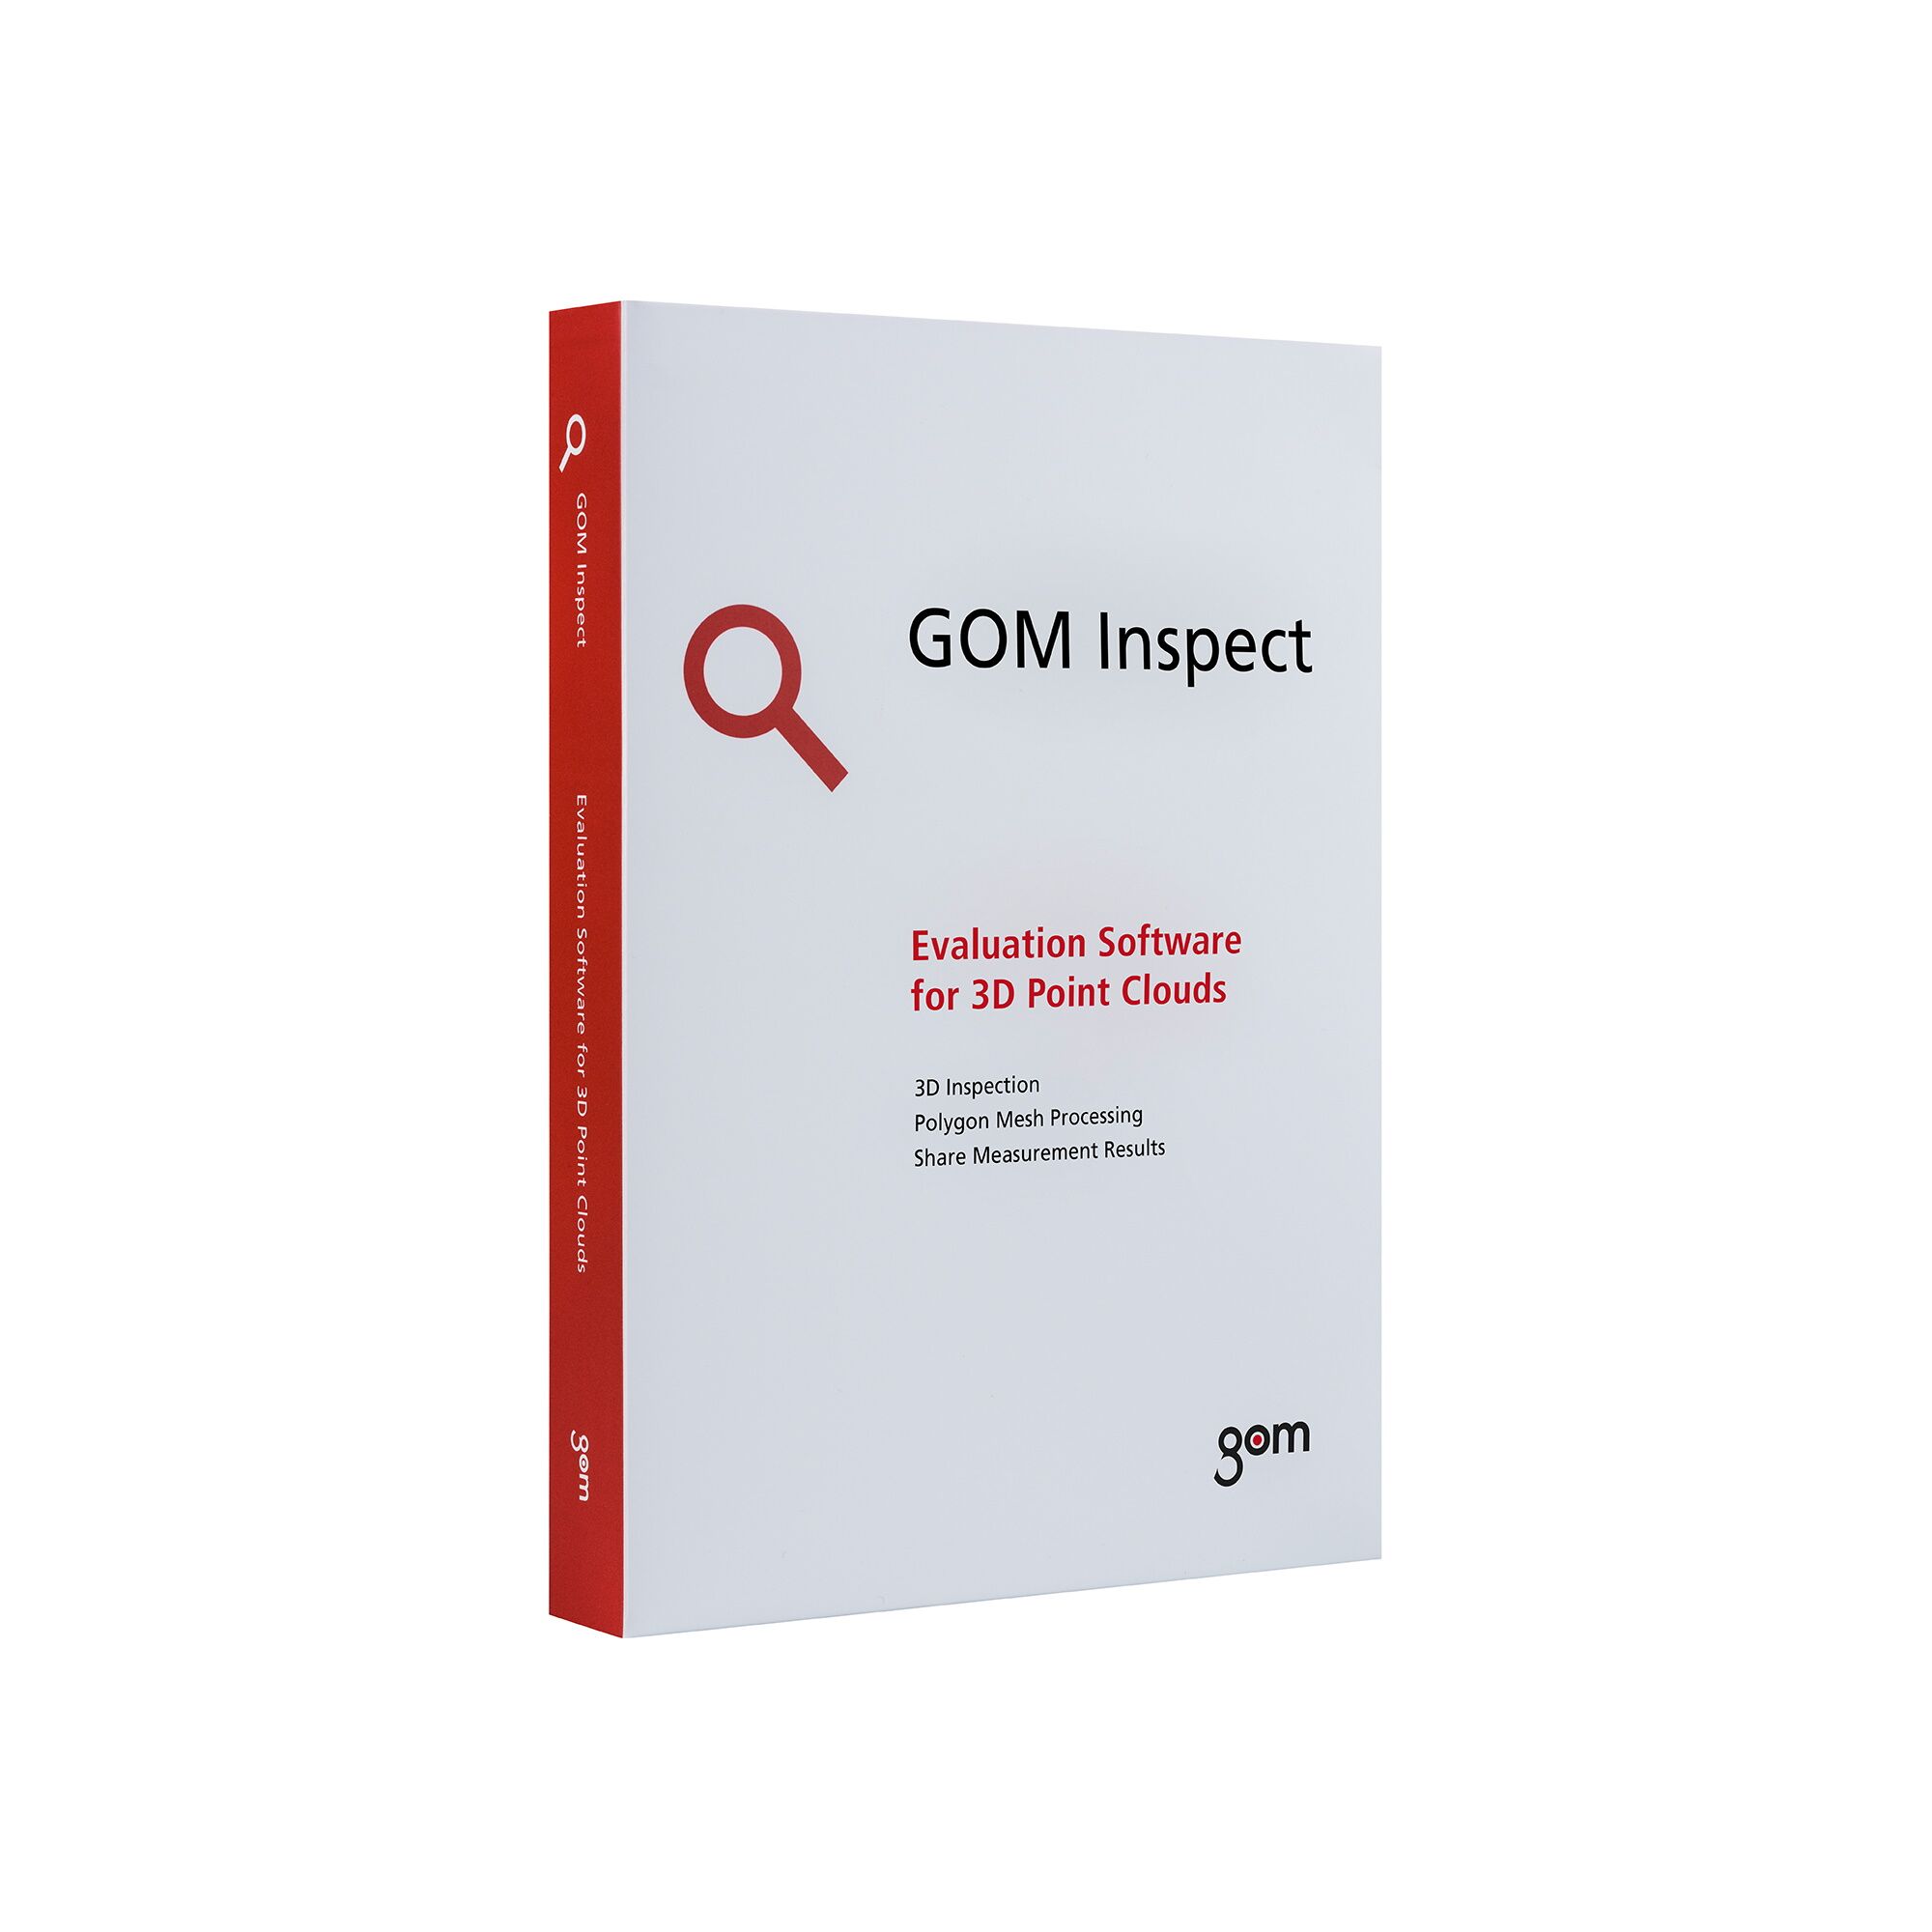 3D Inspection Services with GOM Inspect